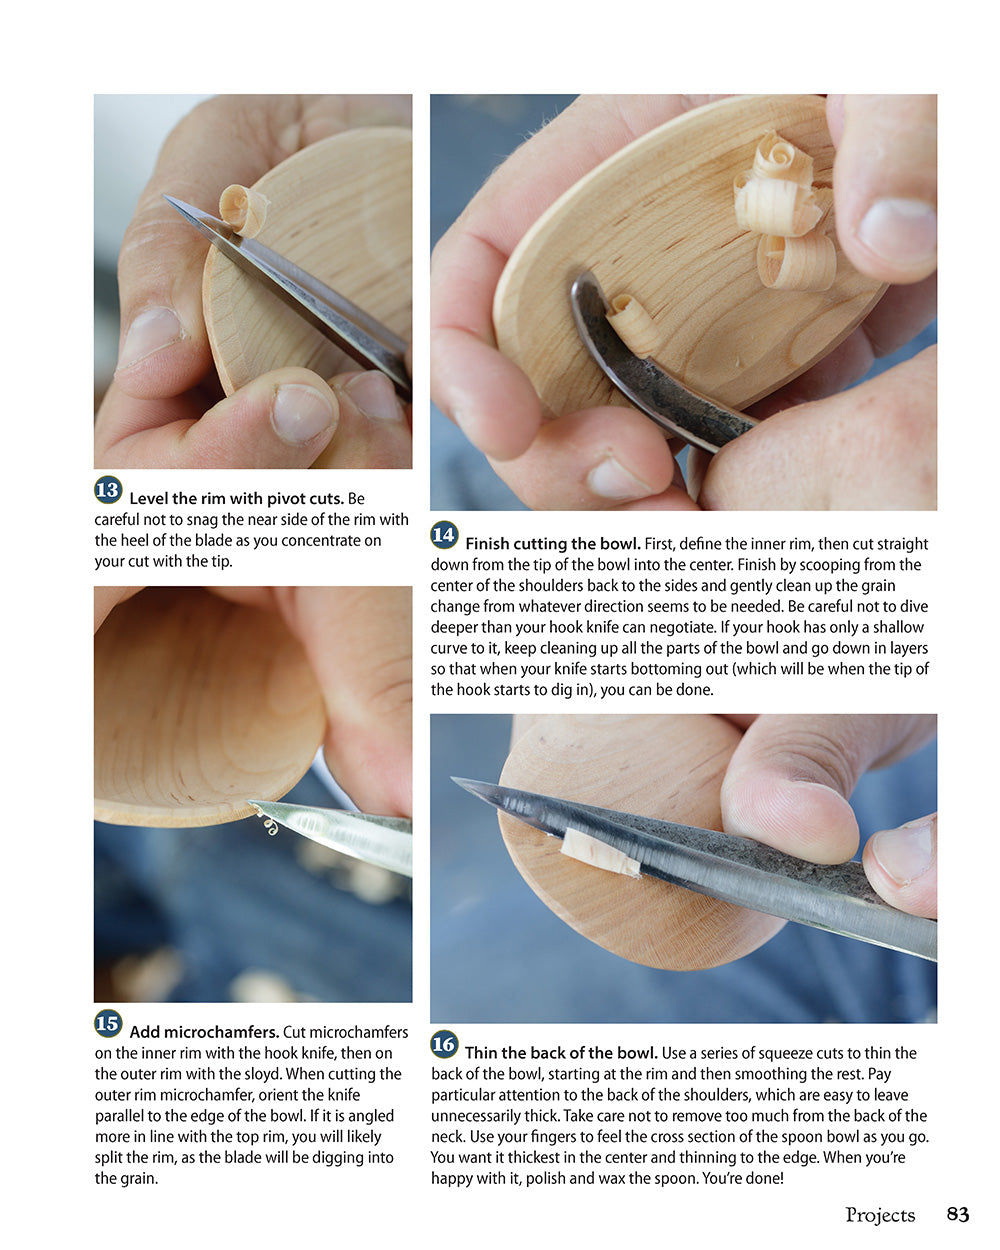 Spoon Carving Project Book